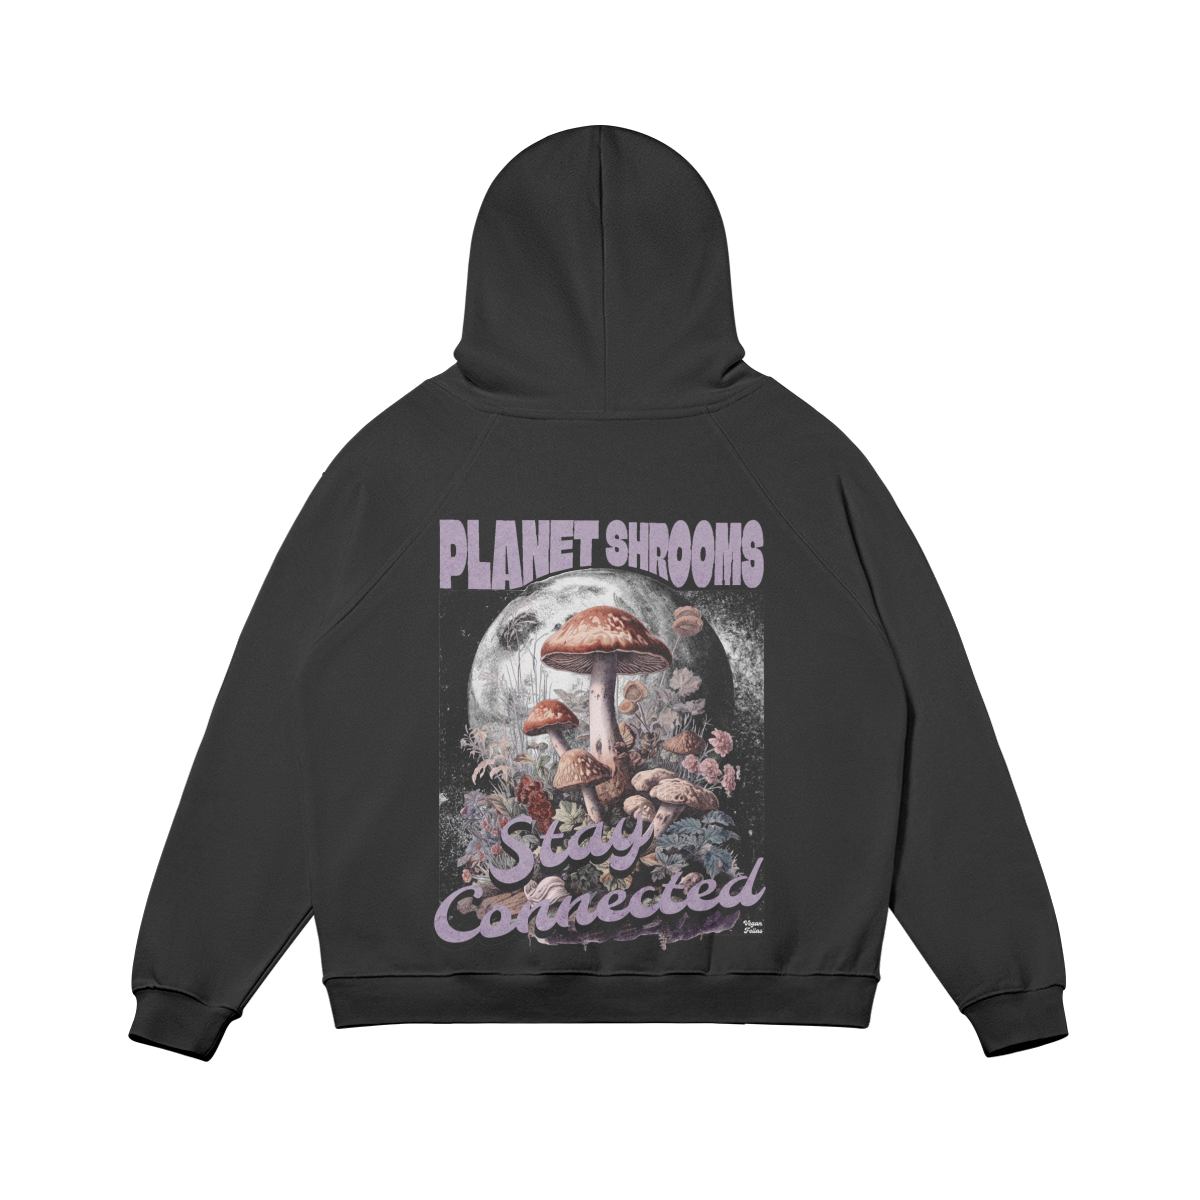 "STAY CONNECTED" Organic Oversized Hoodie